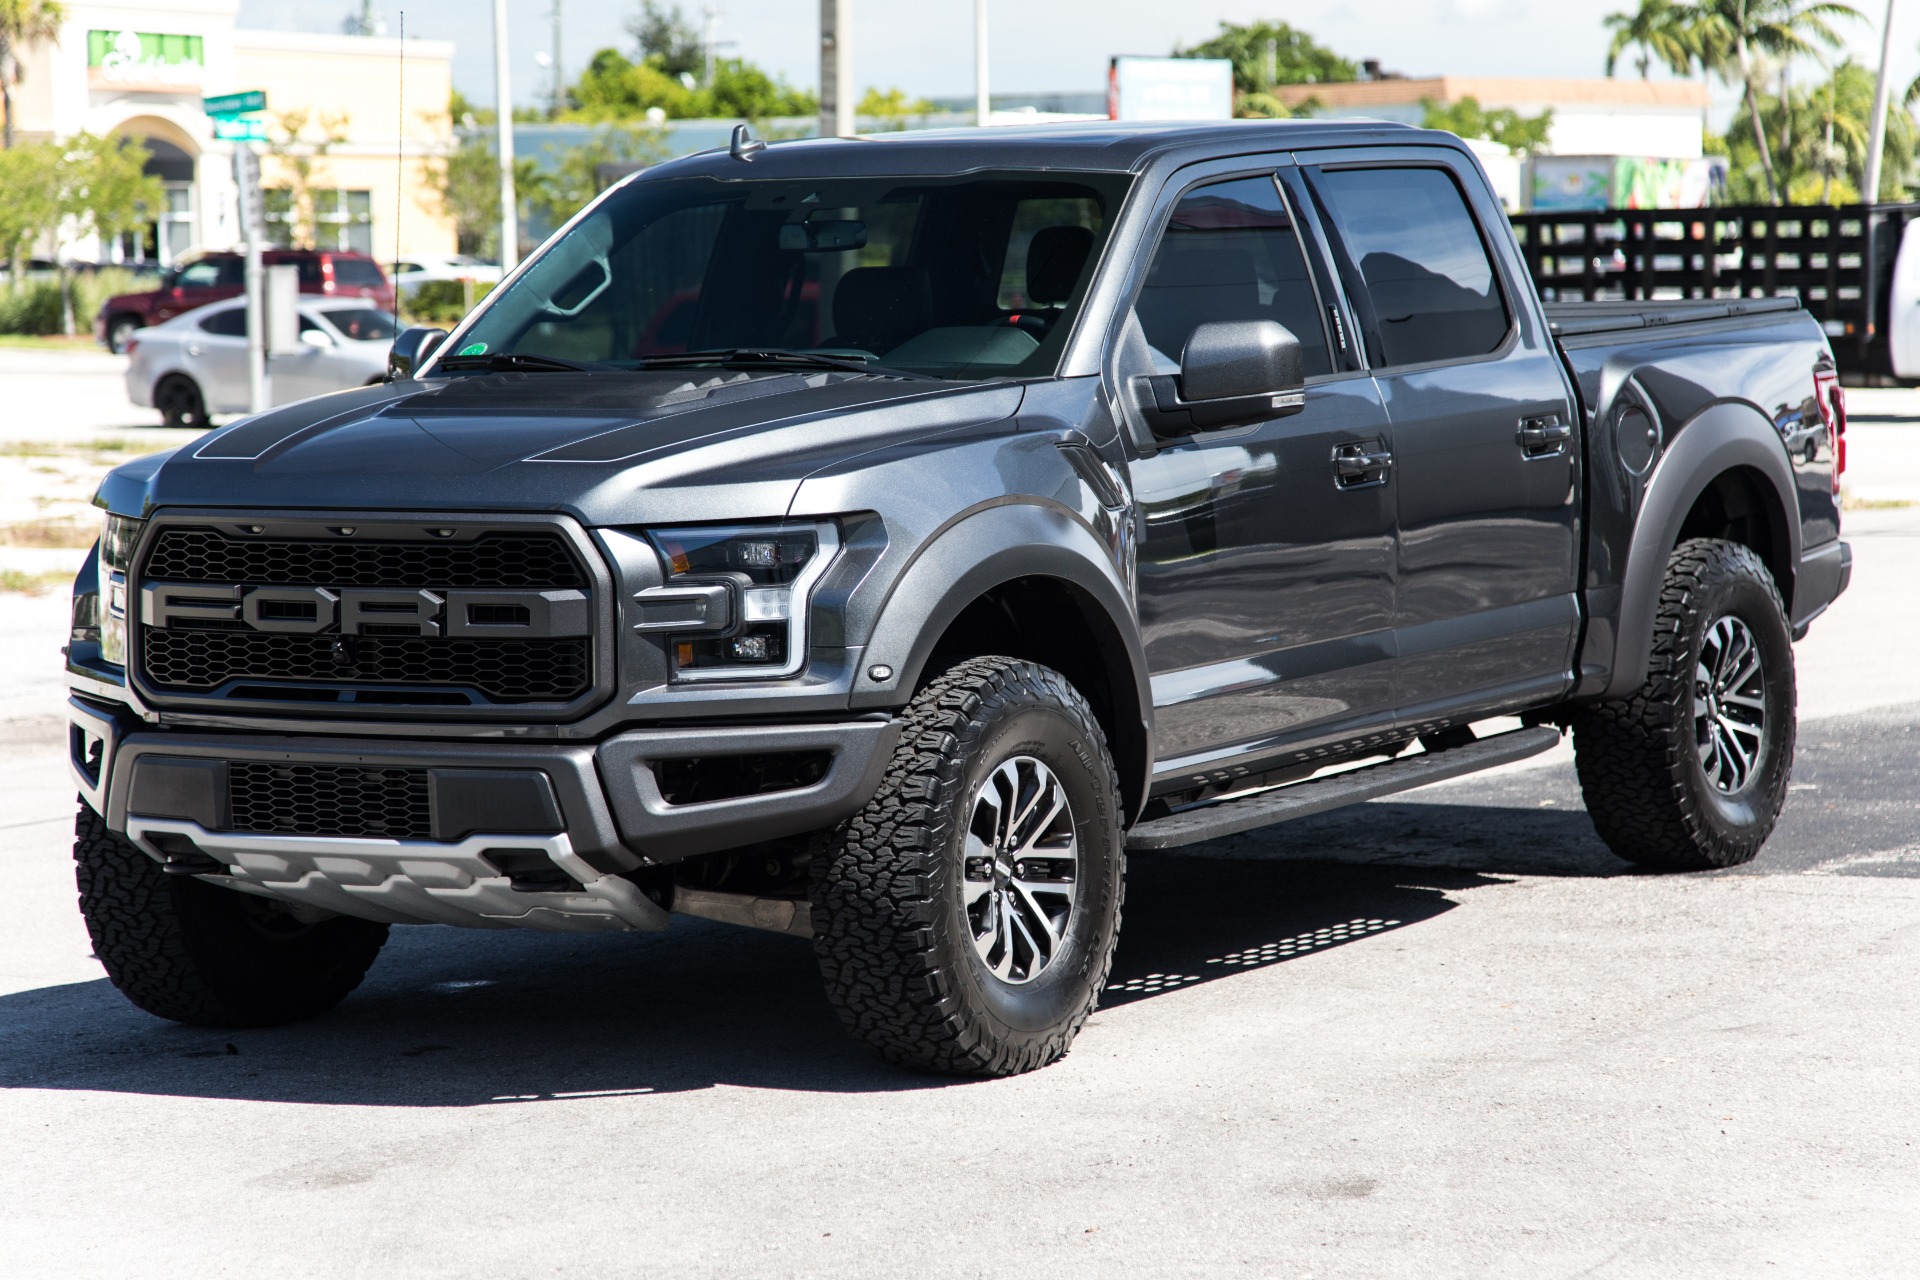 Used 2019 Ford F150 Raptor For Sale (67,900) Marino